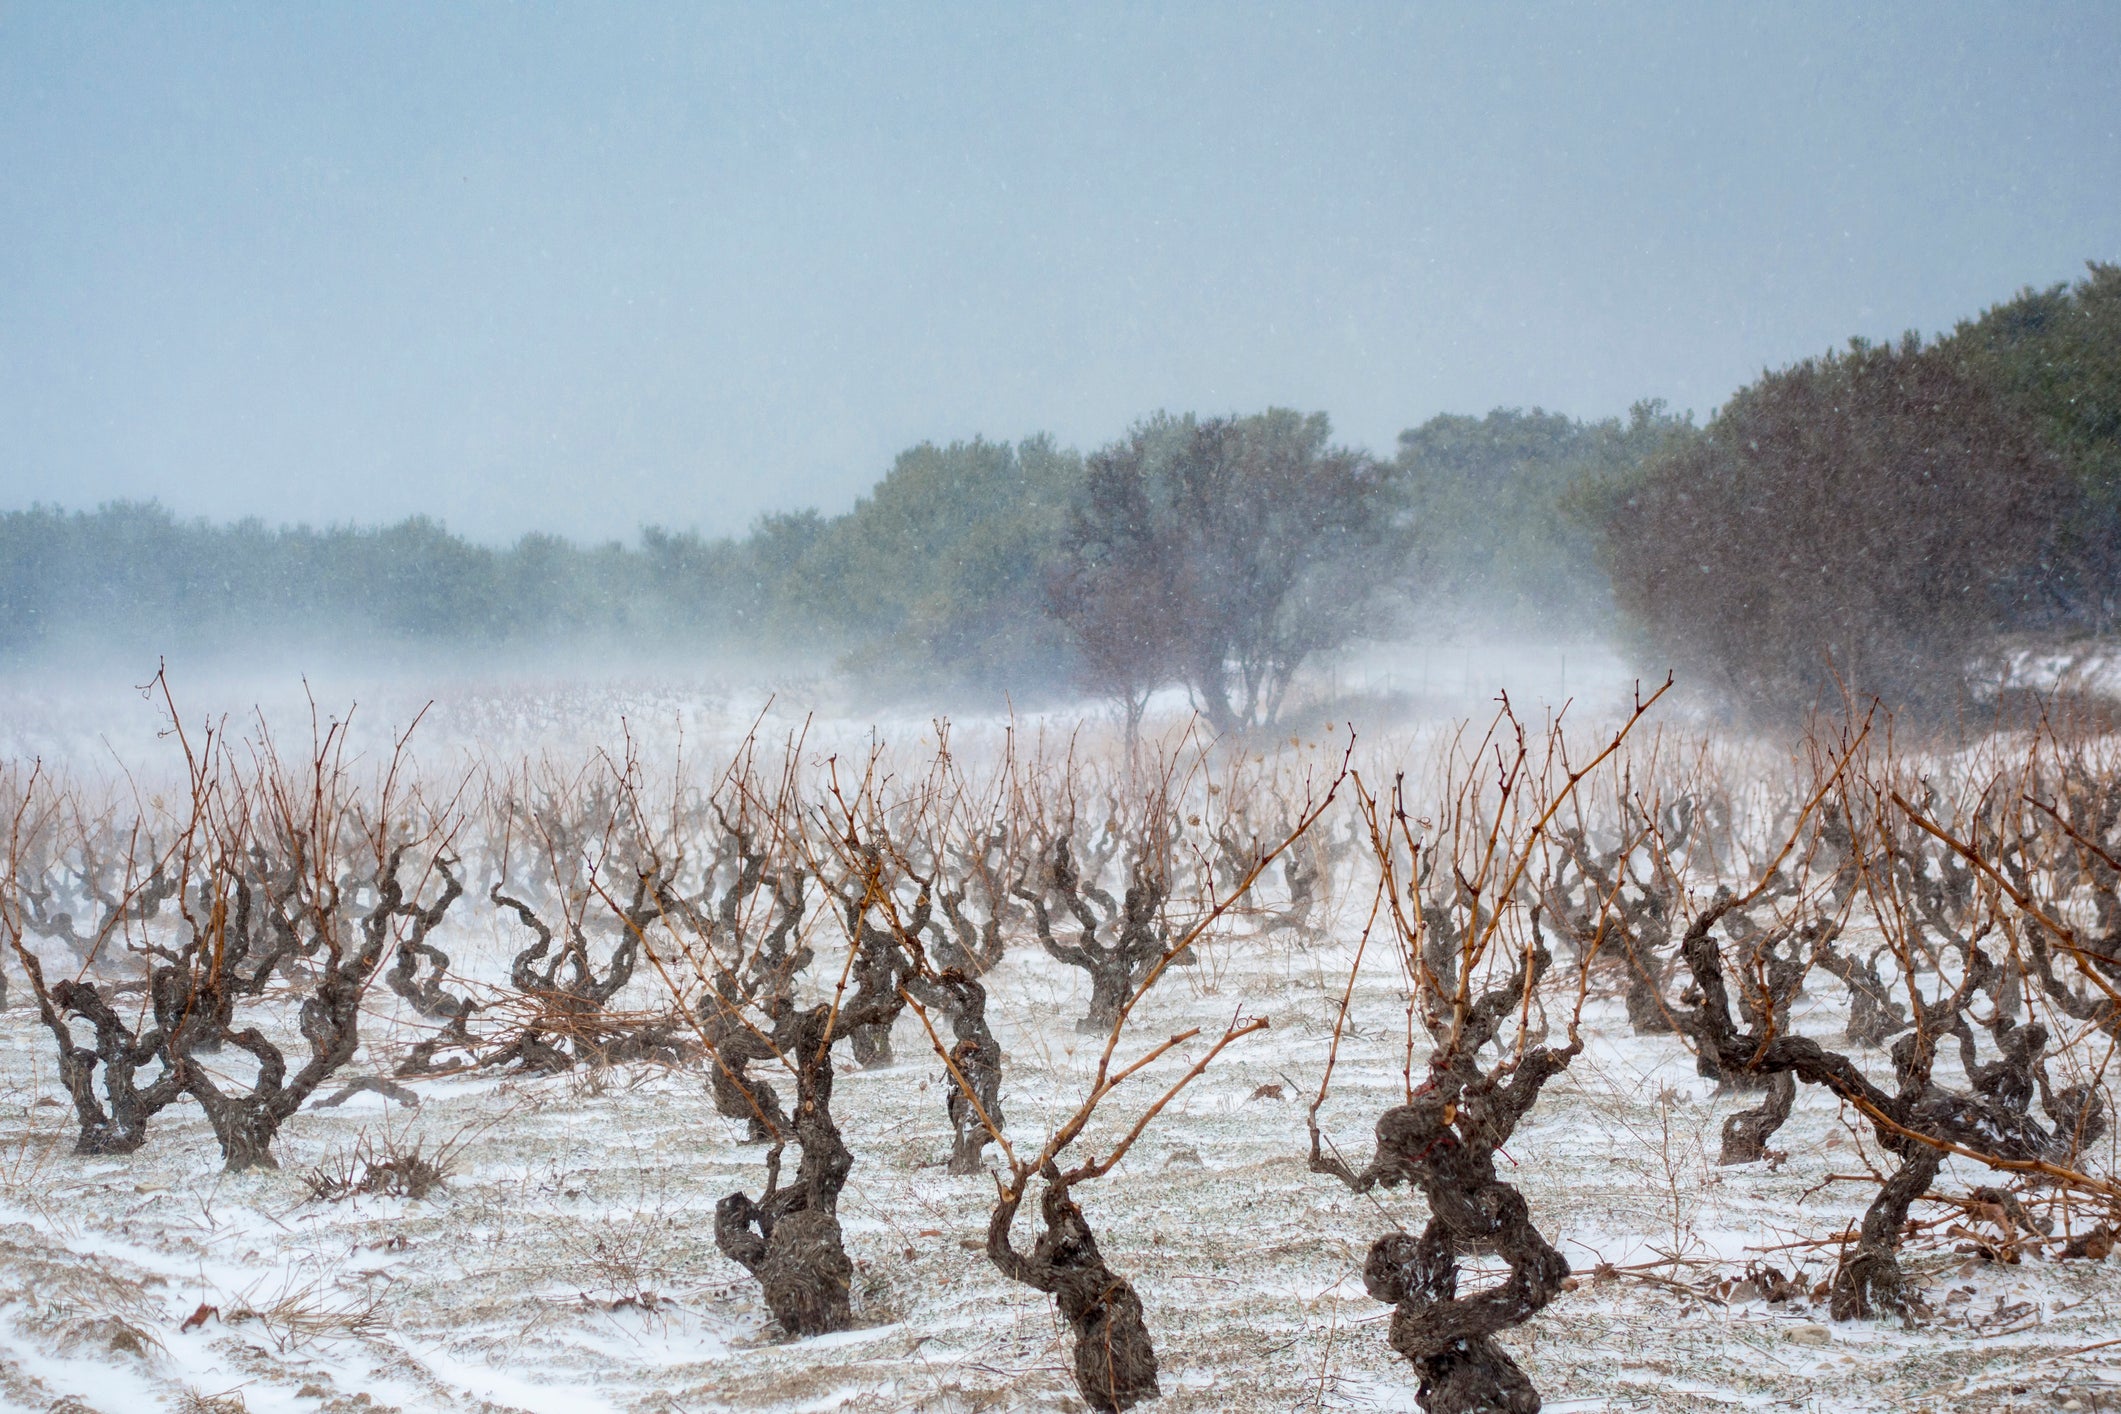 As the world warms, wine growing is becoming possible increasingly further north